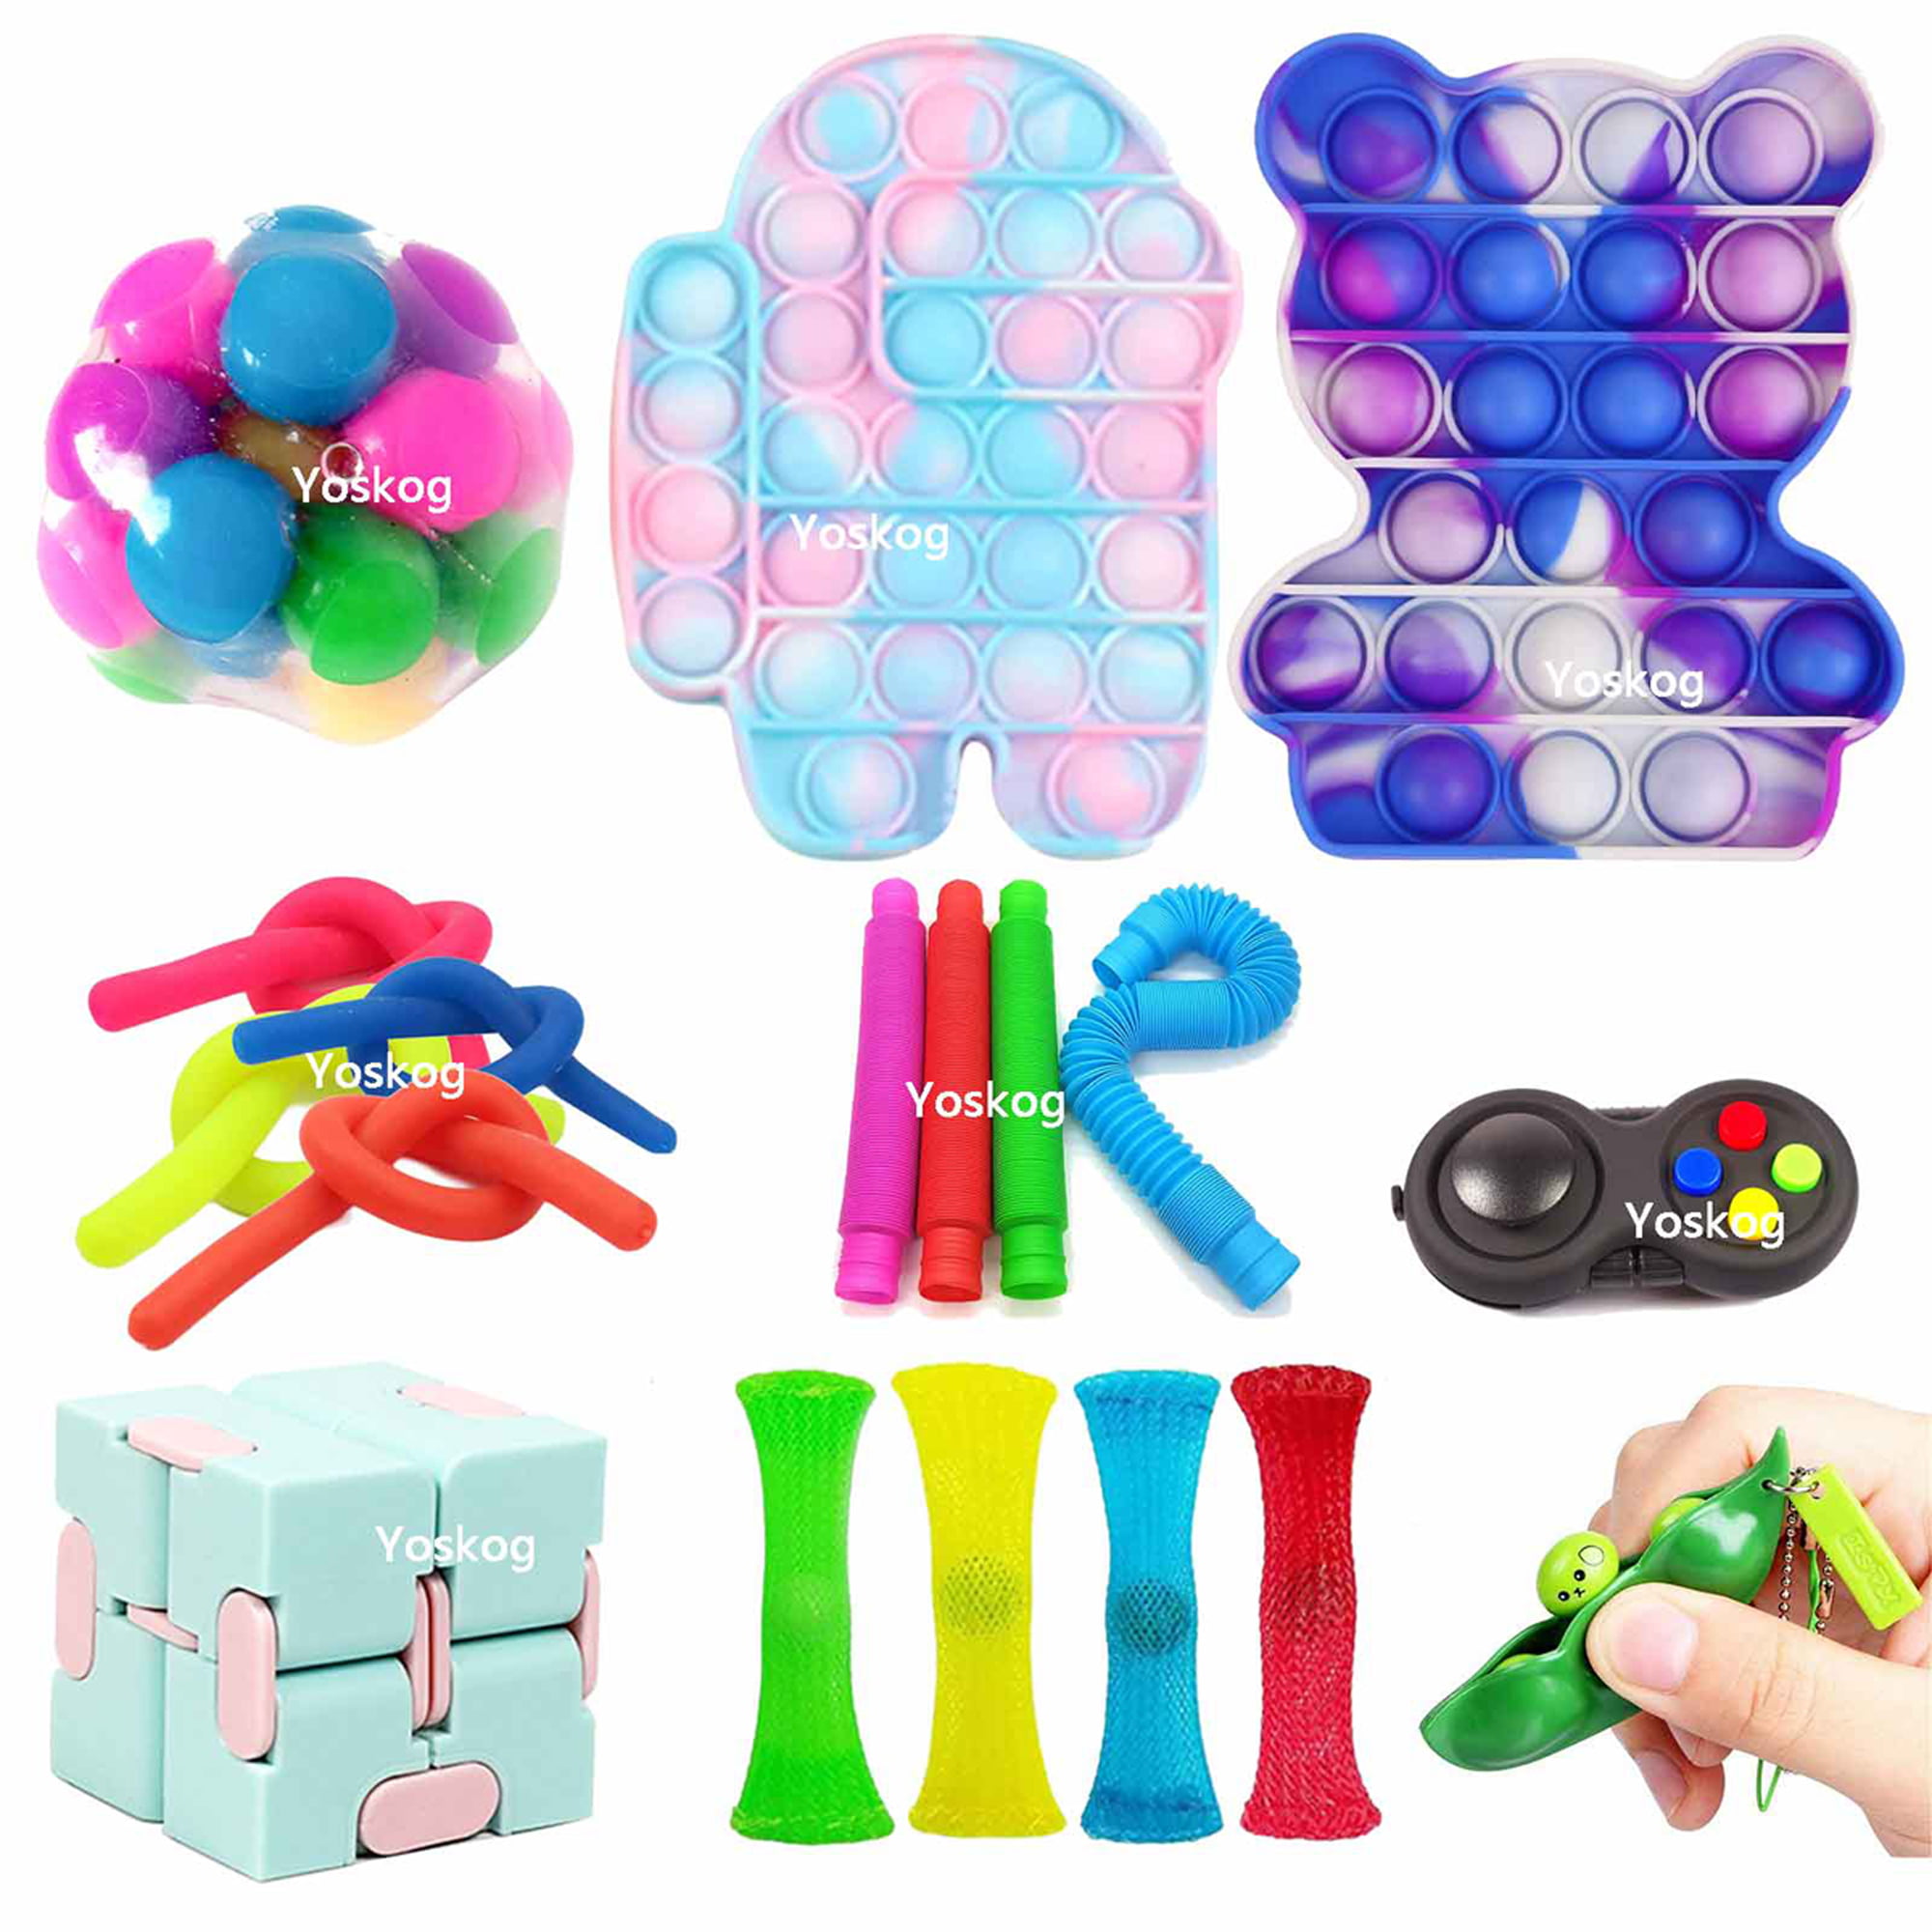 Perfect for ADHD ADD Anxiety Autism 18pcs Fidget Packs 1 Stress Relief Novelty Fidget Pack for Kids Adults for Relaxing Therapy Push Bubble Pop Fidget Toy Set Sensory Fidget Toys Set 24 Pack 